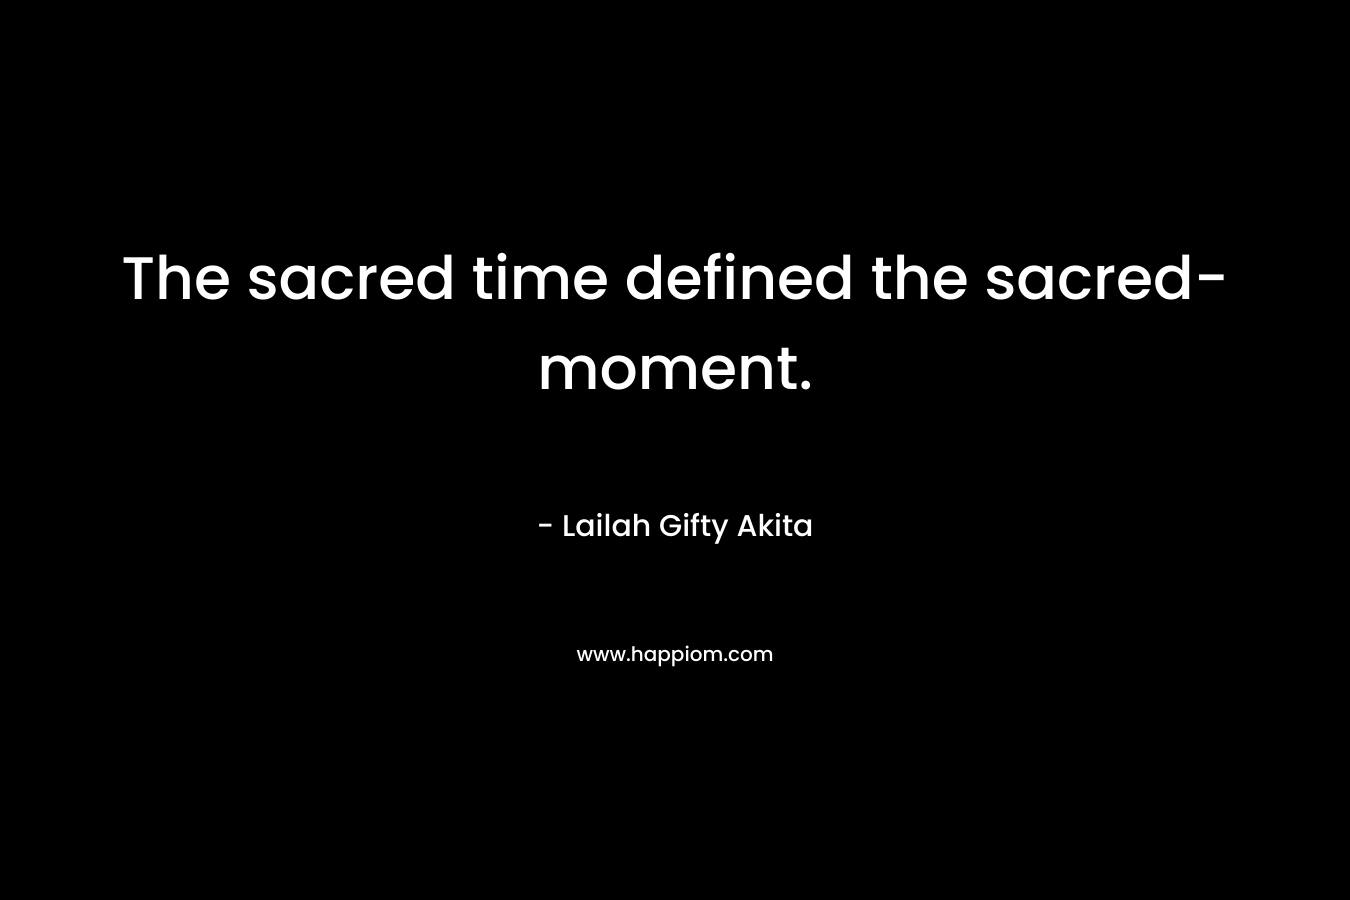 The sacred time defined the sacred-moment.